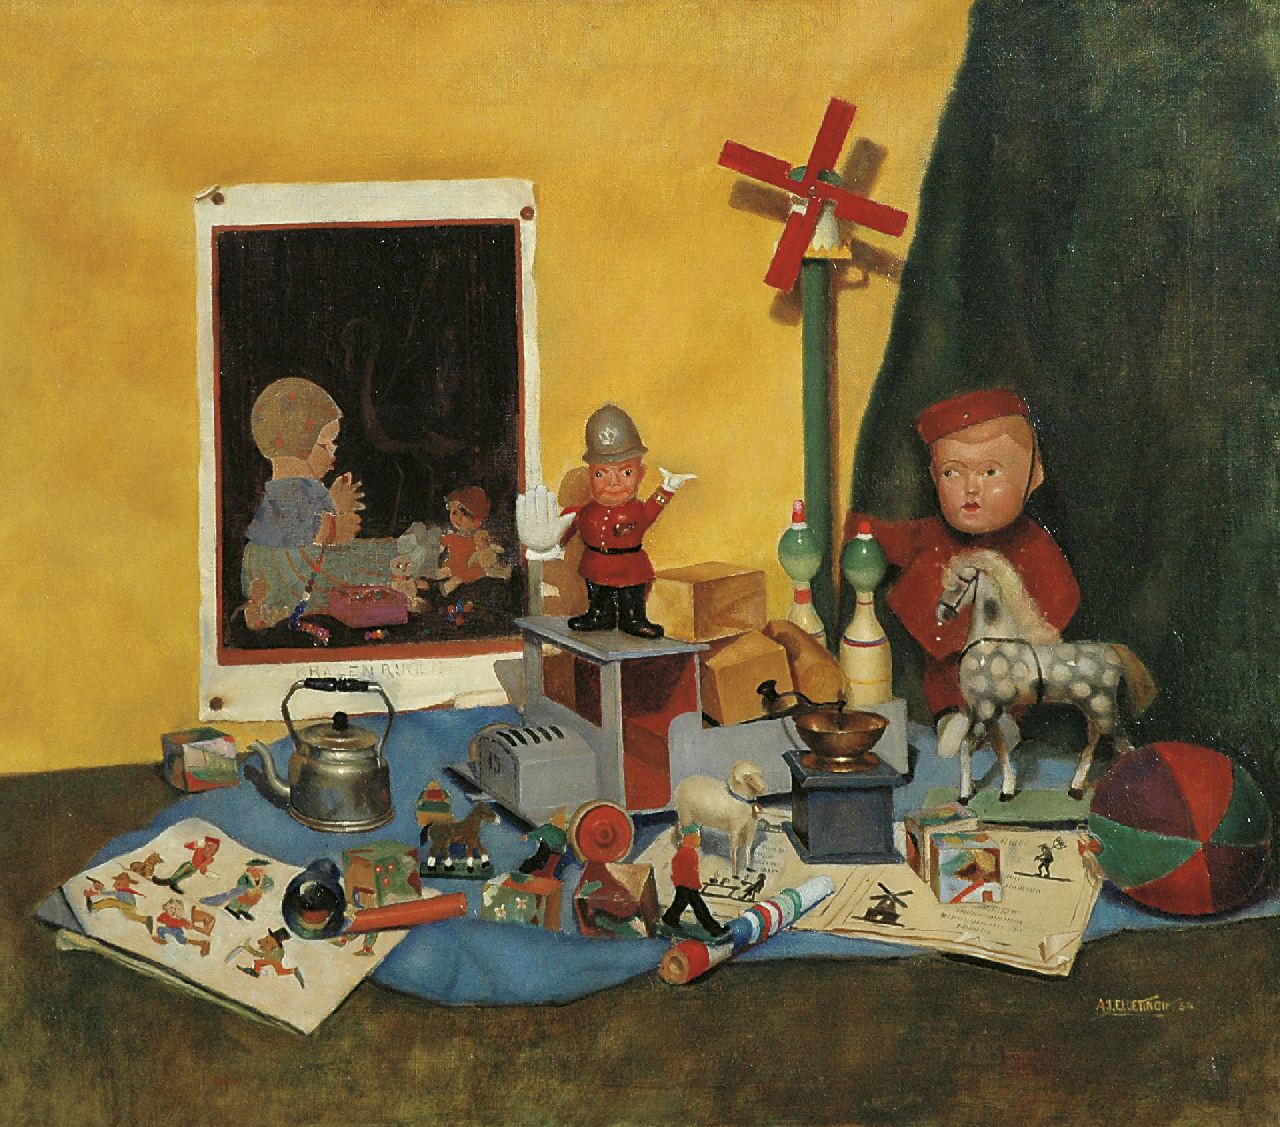 Cloetingh A.J.  | A.J. Cloetingh, Children's toys, oil on canvas 70.3 x 80.3 cm, signed l.r. and dated '30